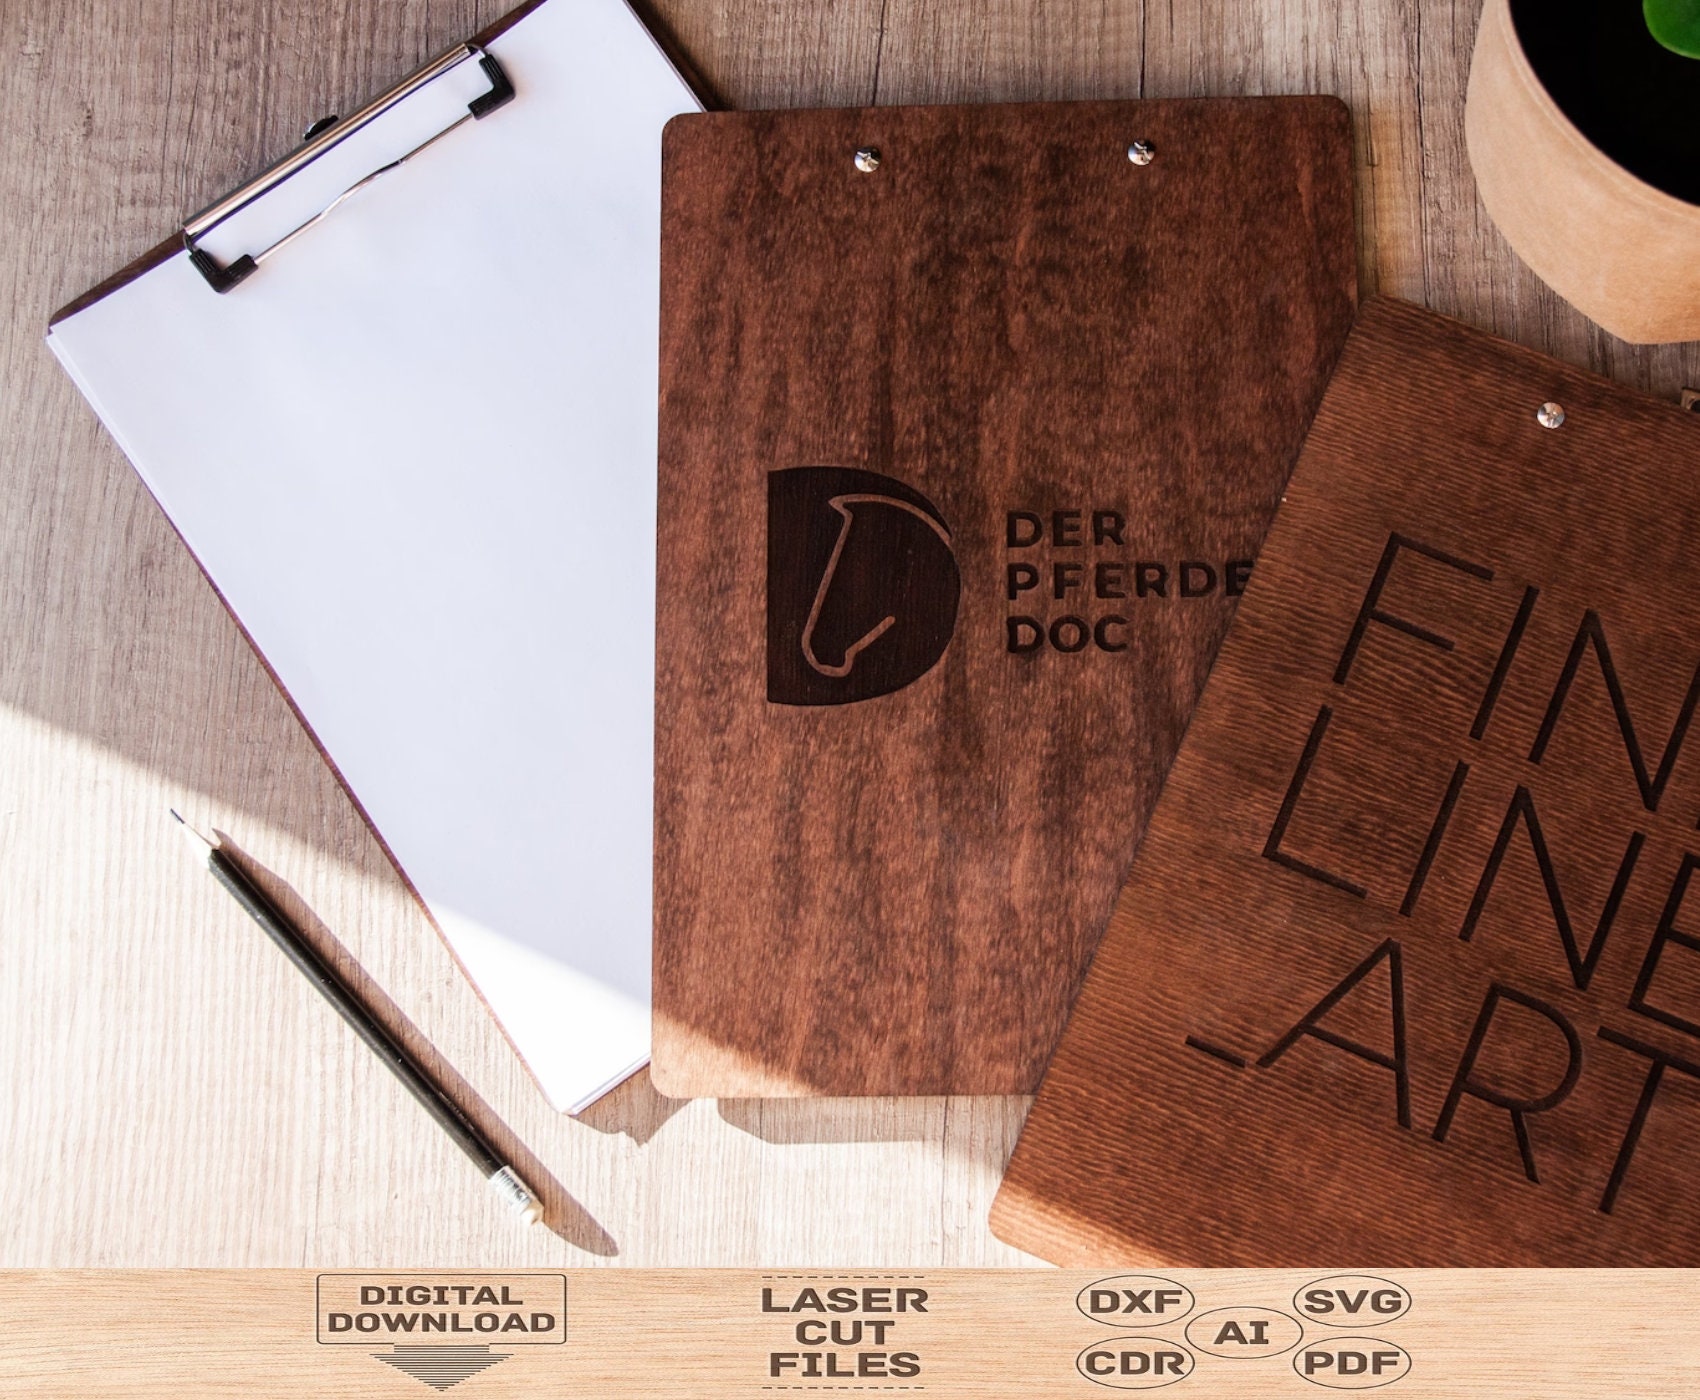 WOOD CLIPBOARD - general for sale - by owner - craigslist